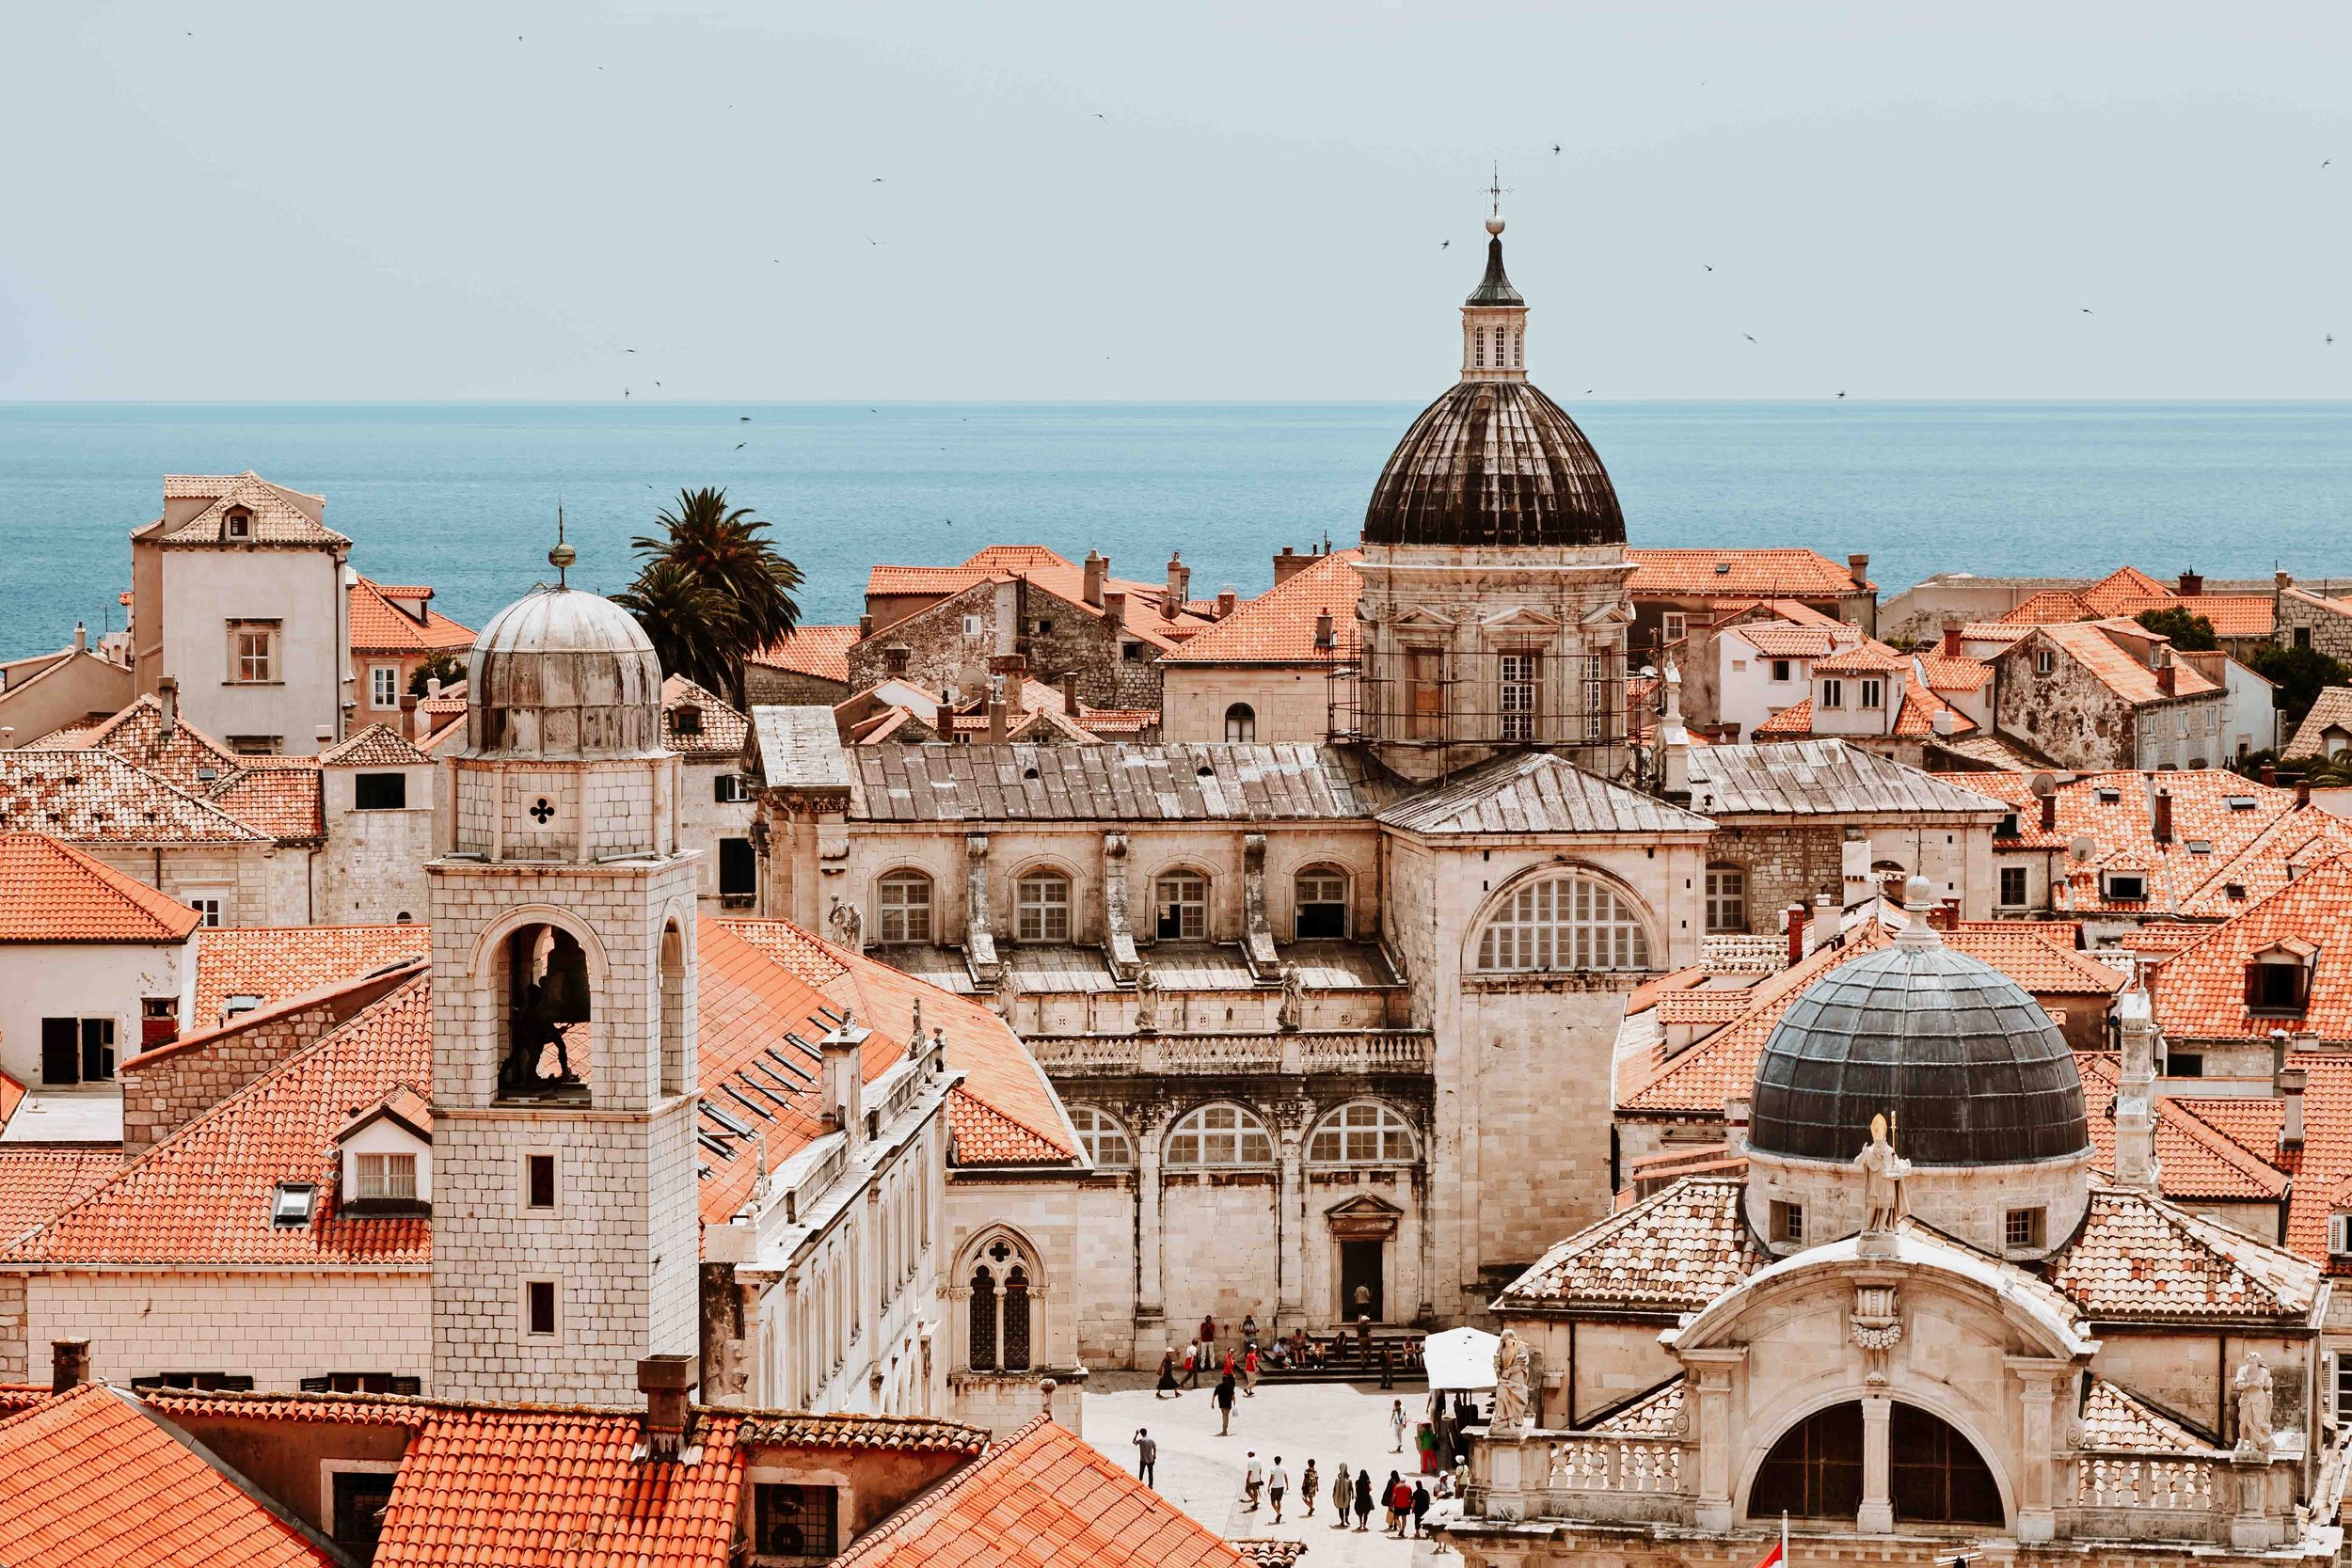 Colourful orange rooftops in Dubrovnik on a 3 month vacation in Europe